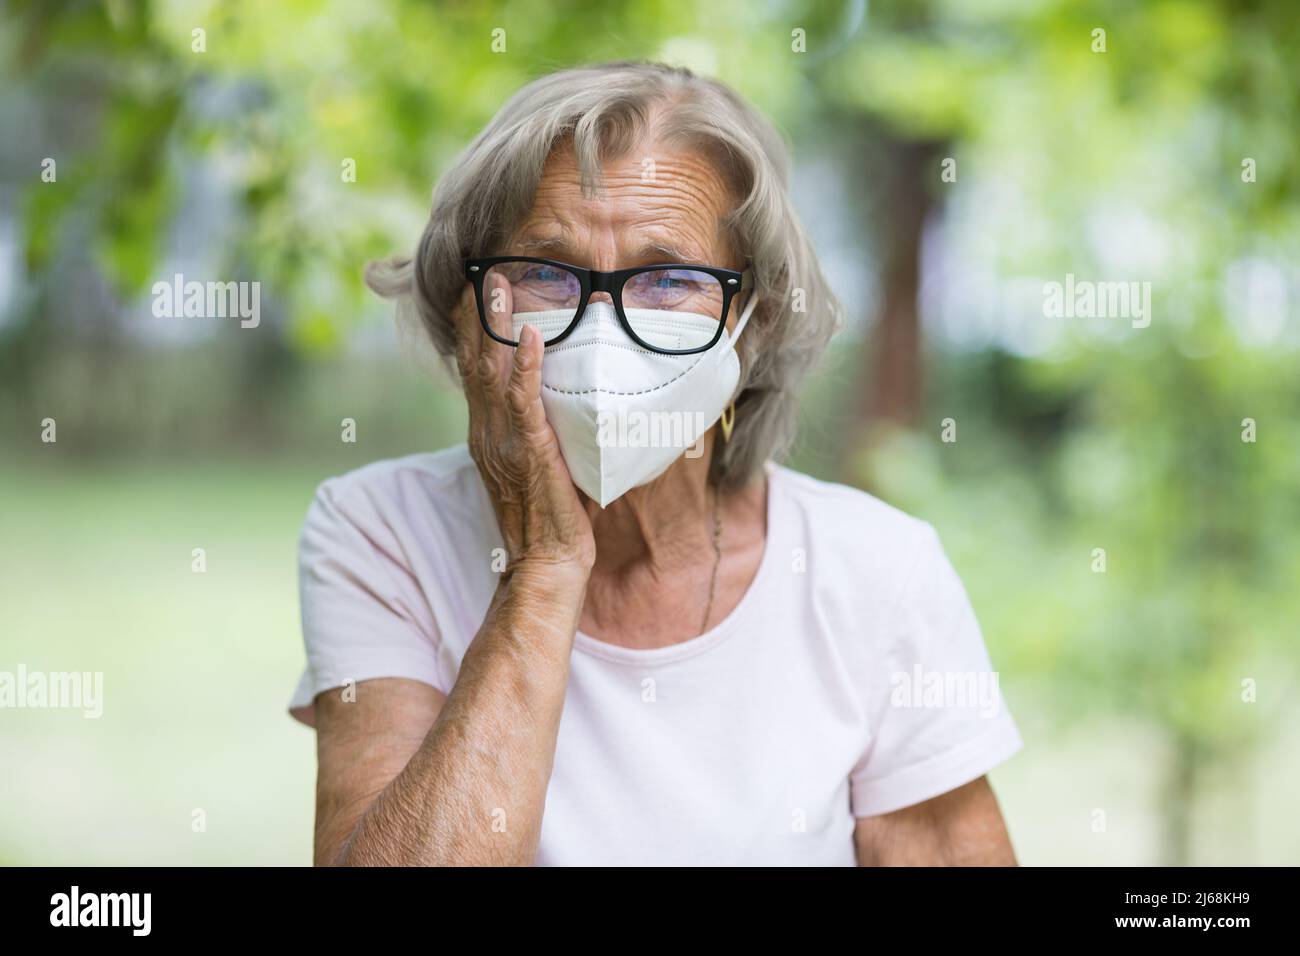 Elderly woman wearing a protective face mask against corona virus Stock Photo